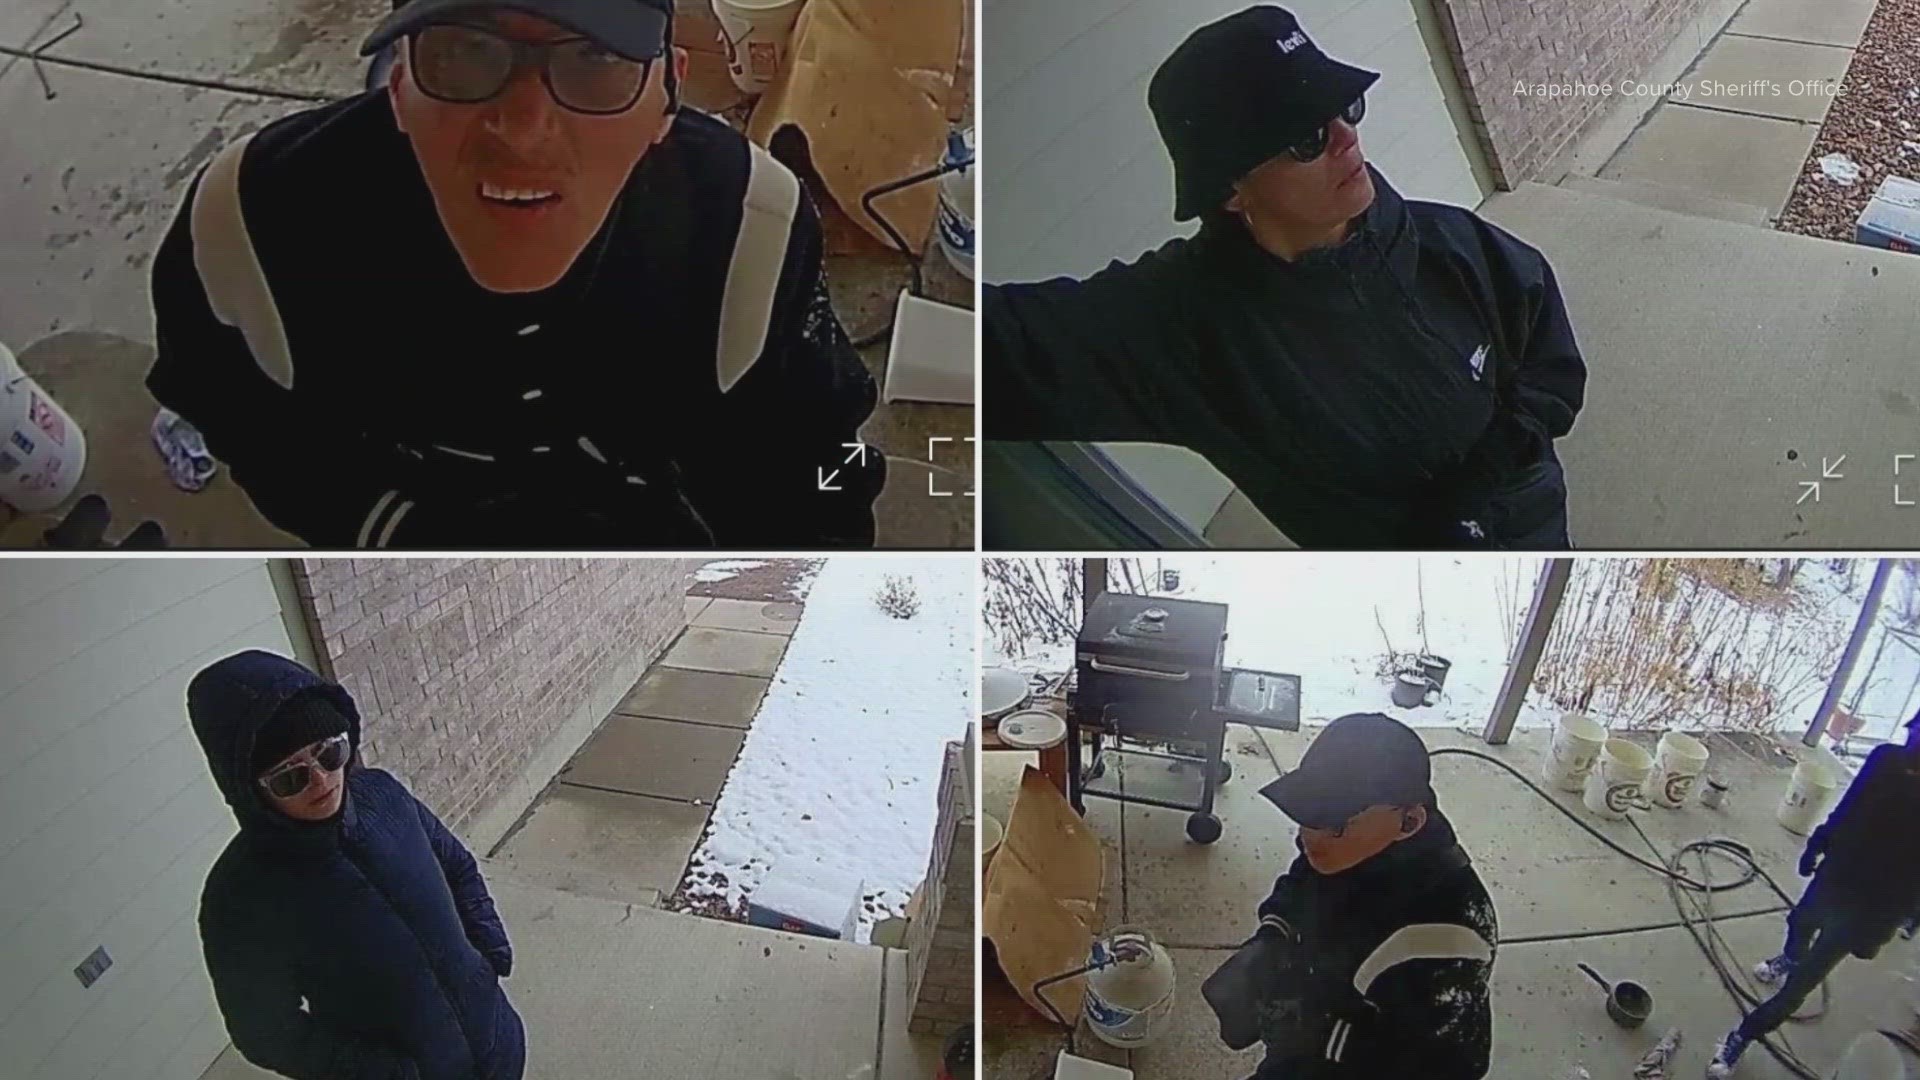 A total of seven suspects are wanted in connection to two separate home burglaries, the Arapahoe County Sheriff's Office said.